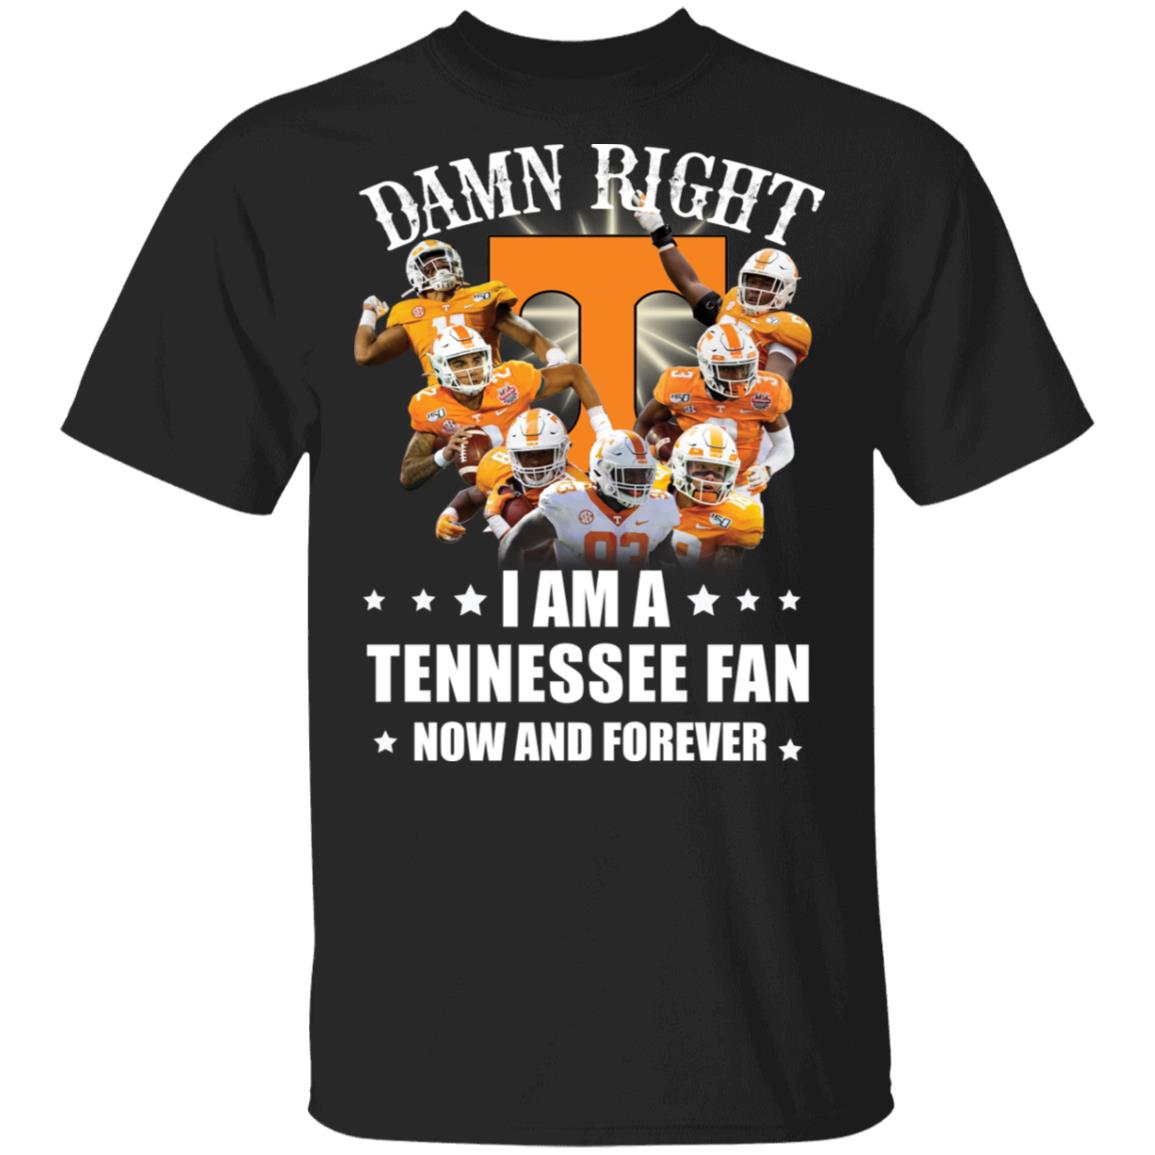 Damn right i am a Tennessee fan now and forever shirt - Rockatee